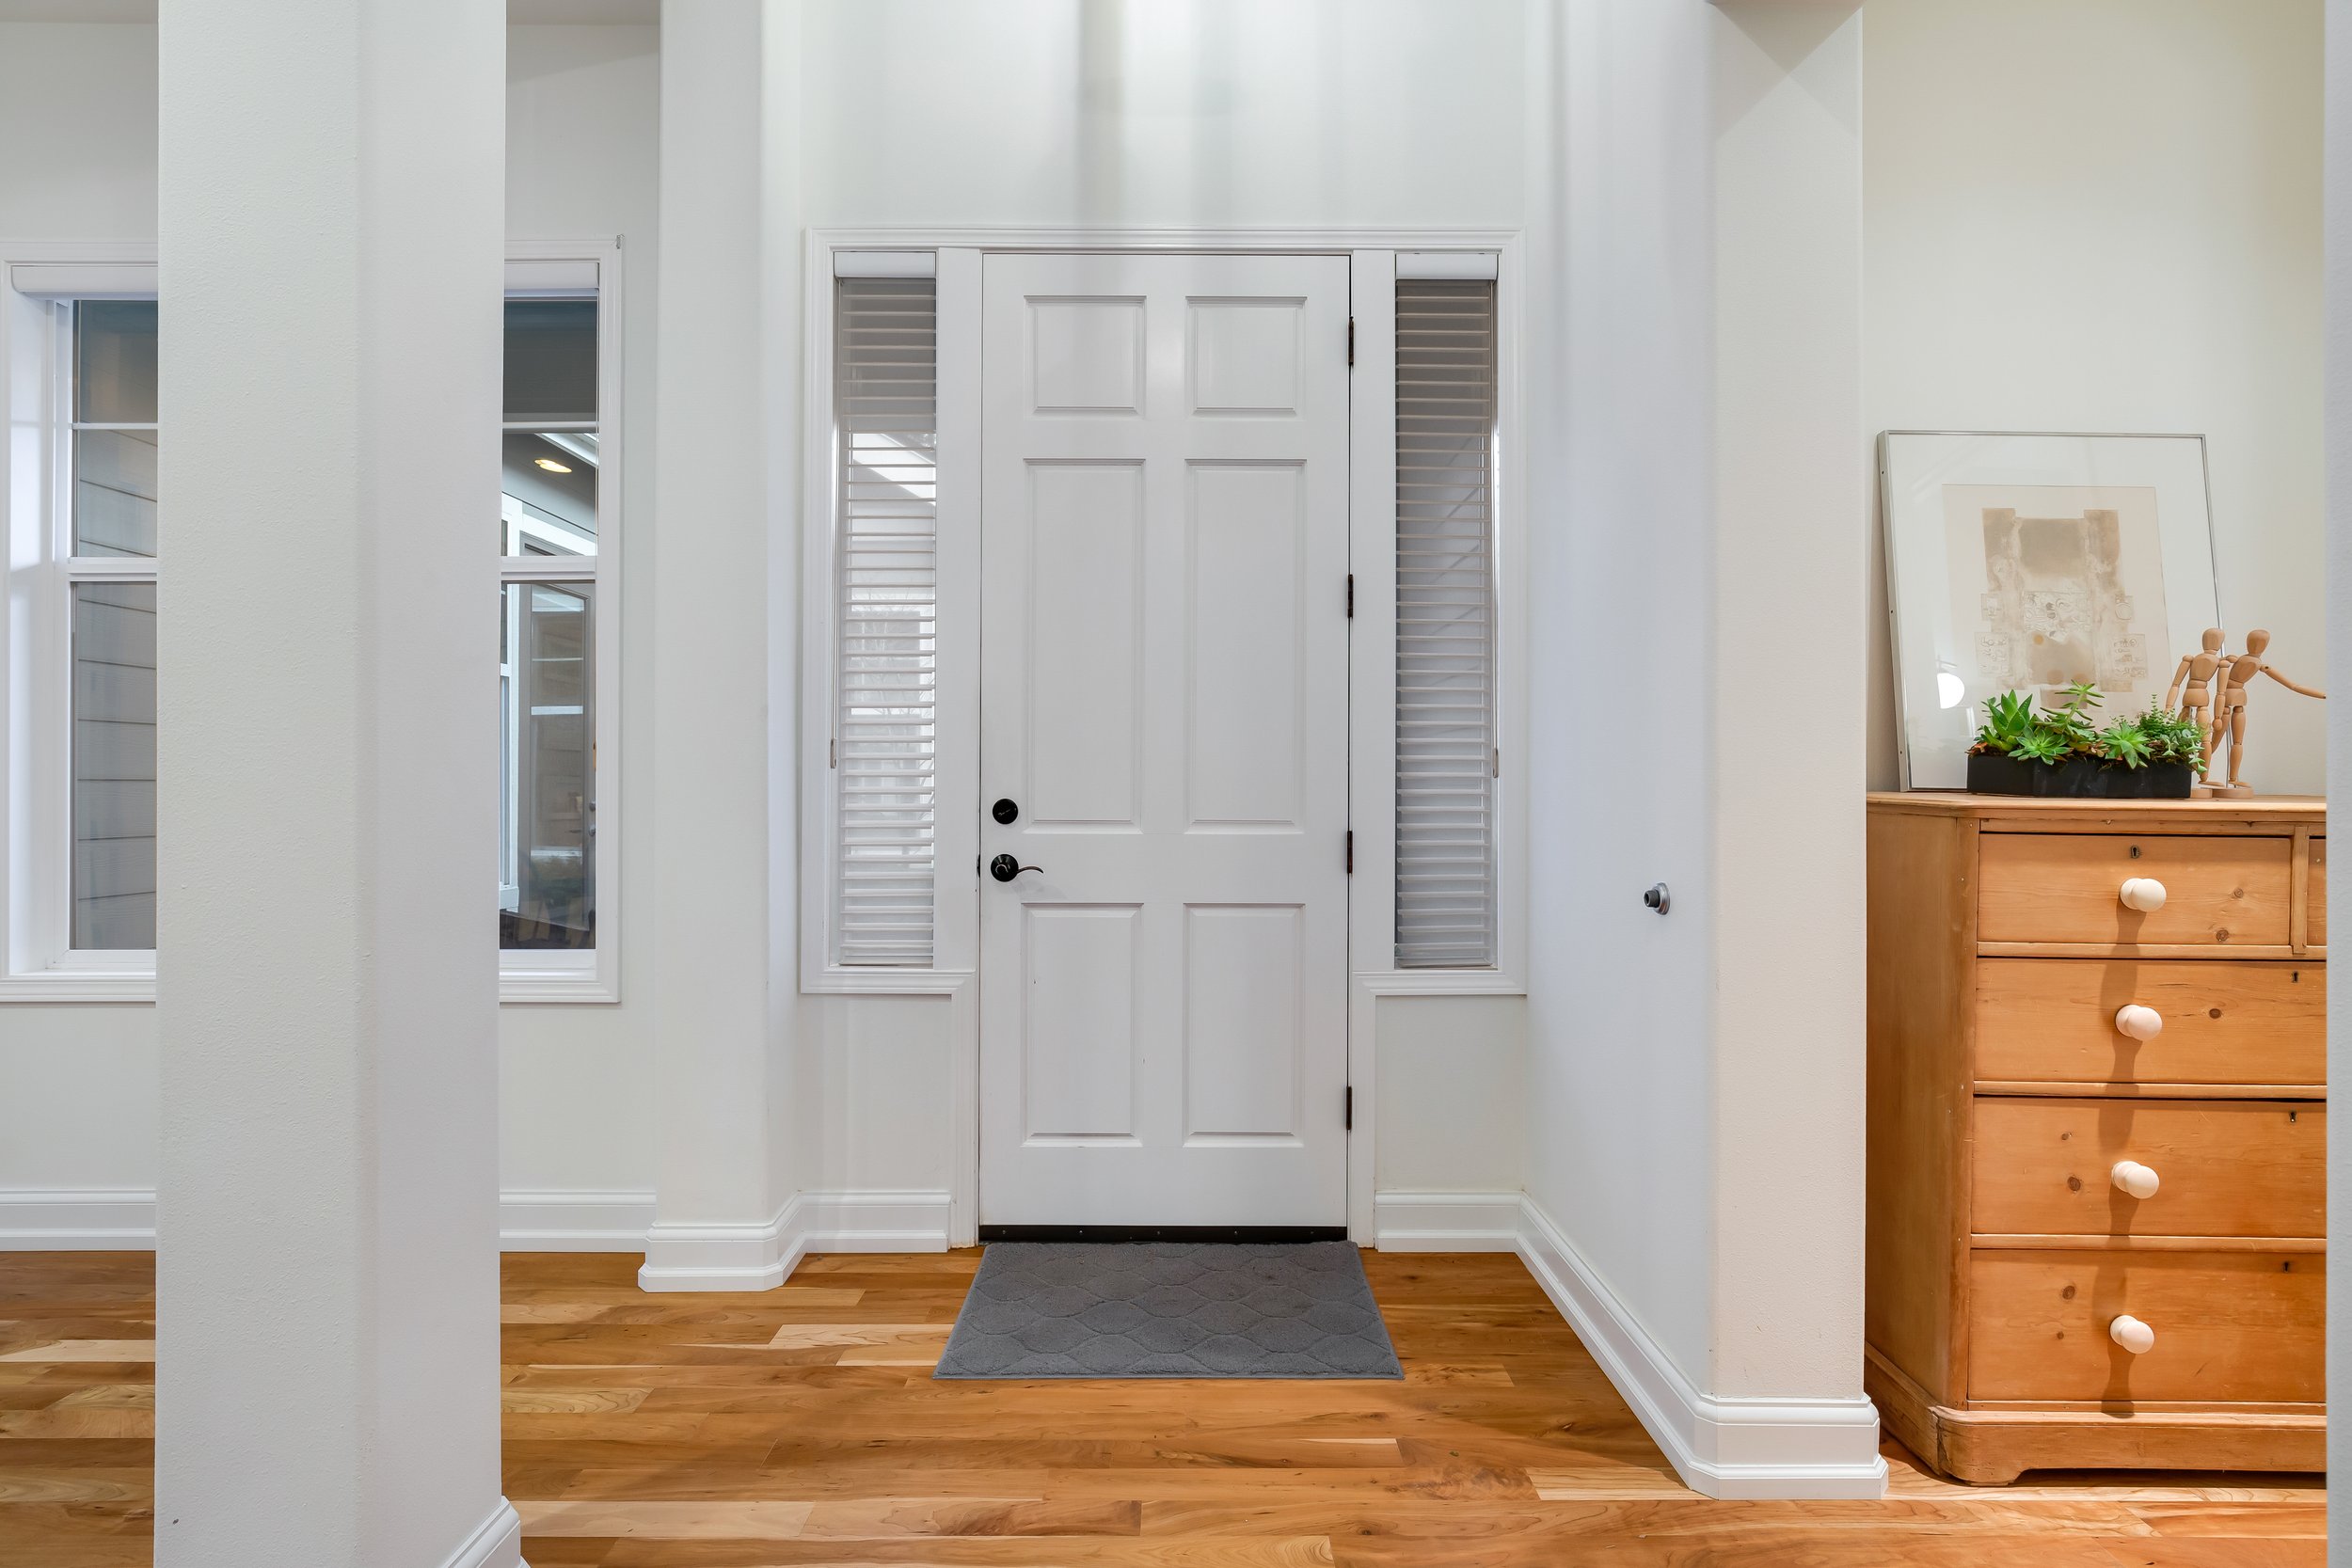  interior of entryway with hardwood floors and windows 